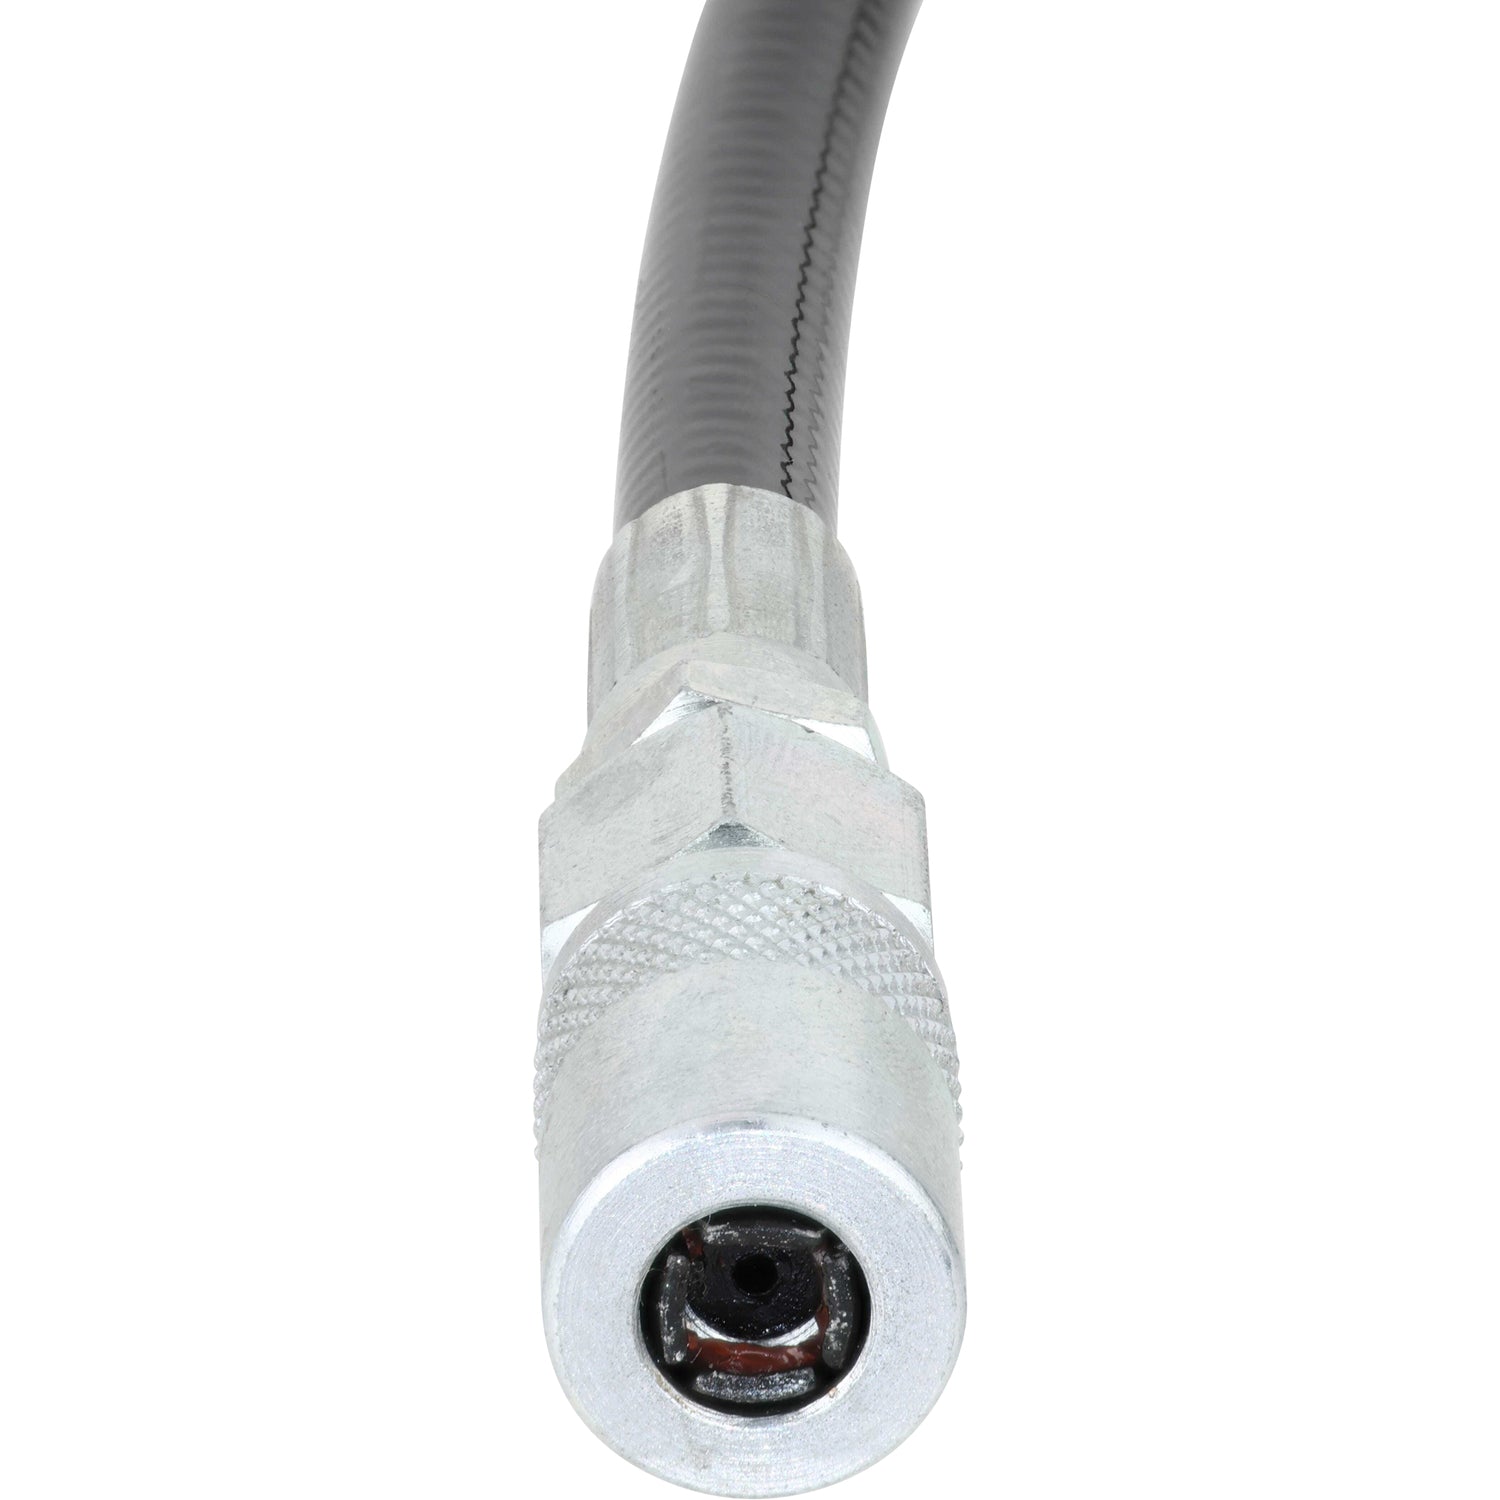  8 inch black flexible hose and connector white background